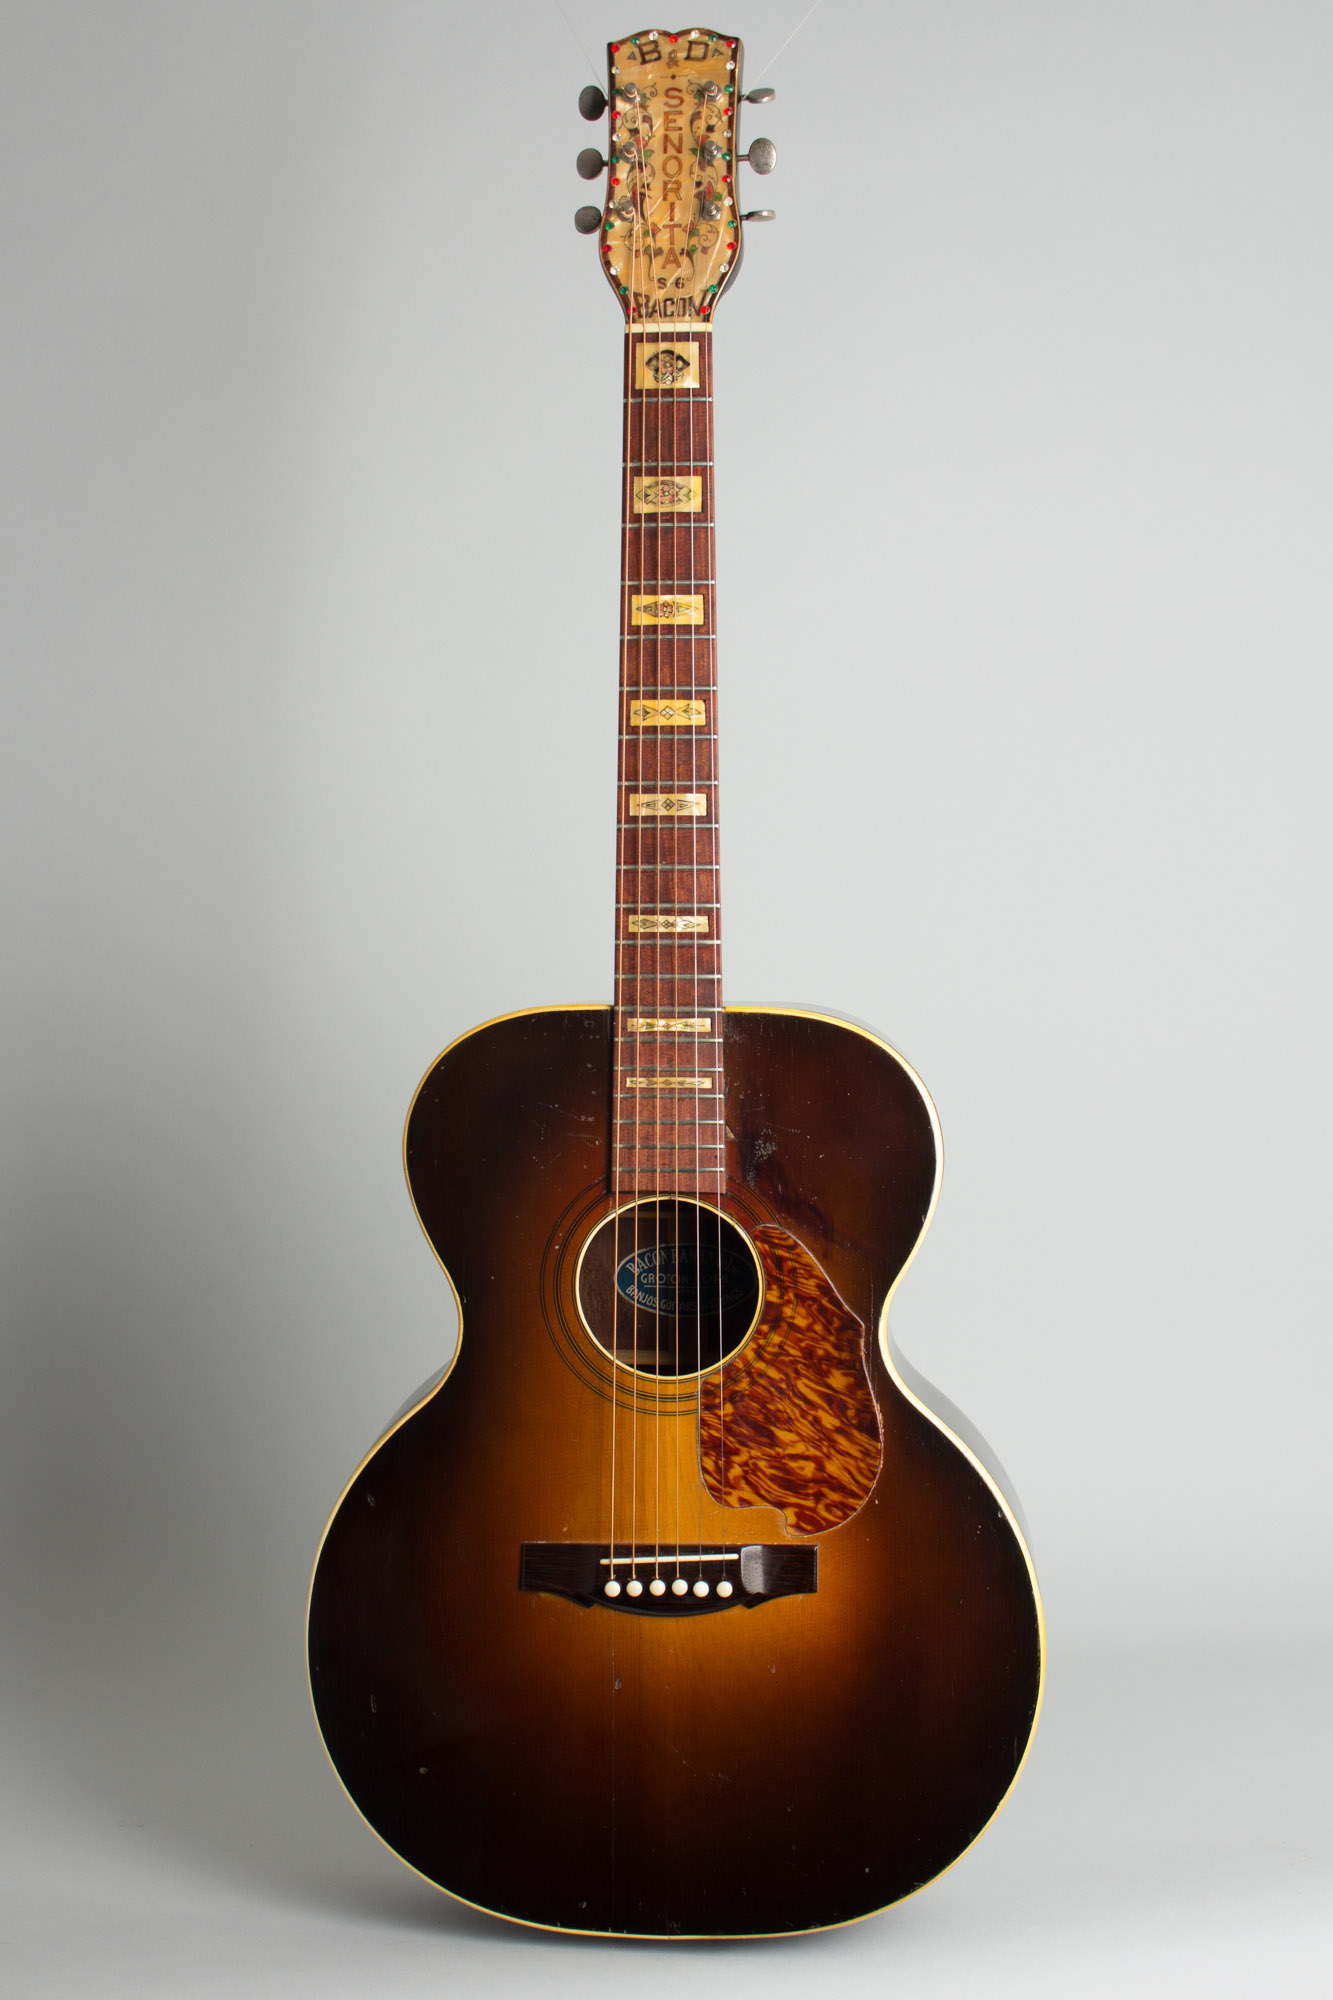 Bacon & Day Senorita S-6 Previously Owned by Steely Dan's Walter Becker Flat Top Guitar (1935) | RetroFret